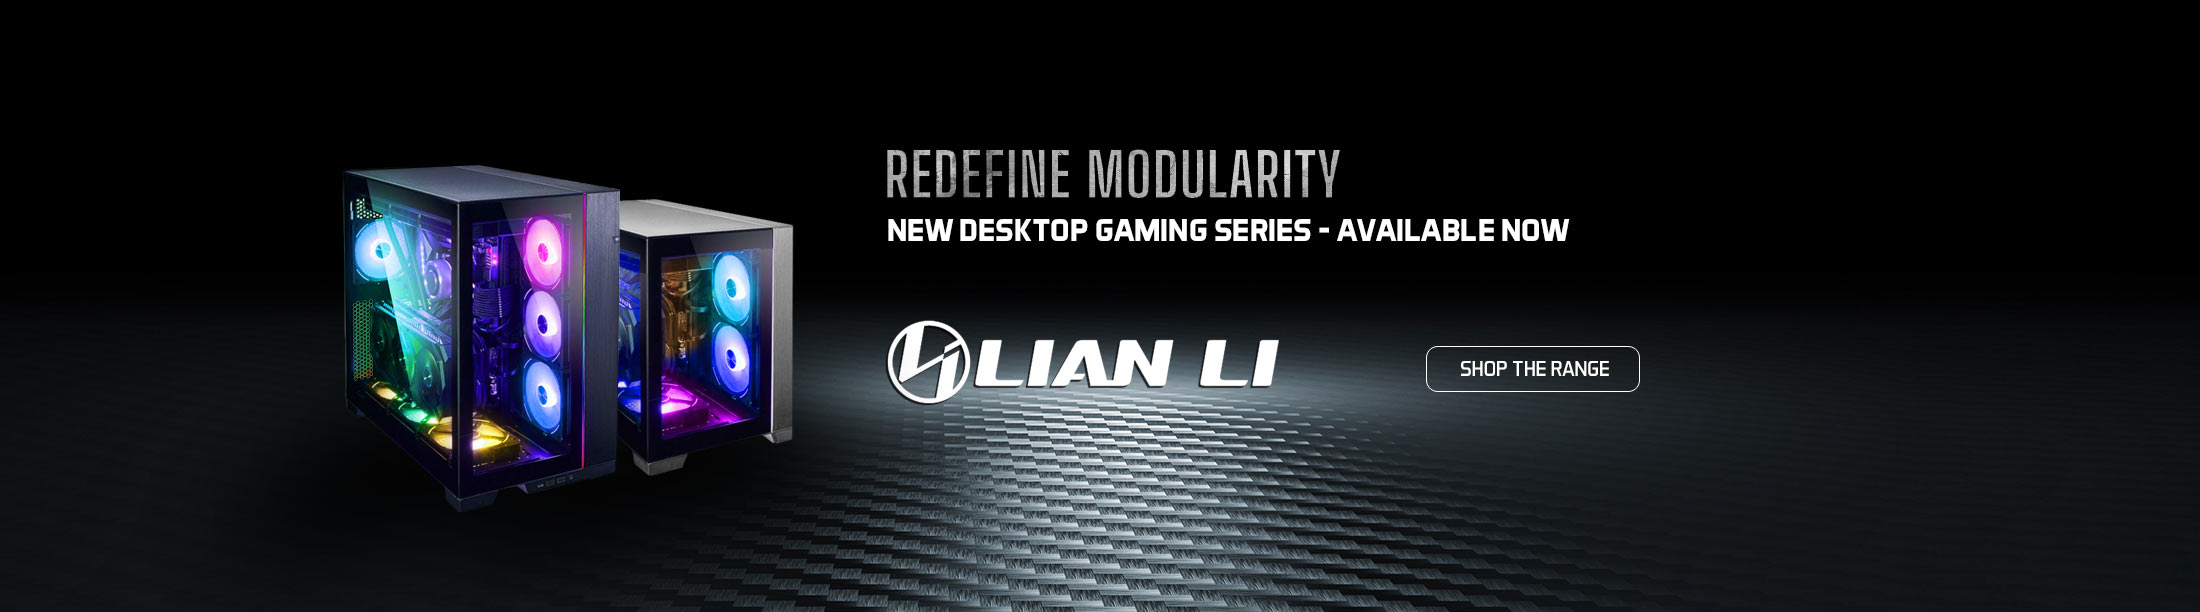 High performance, custom built Gaming PCs utilising the very best in cutting-edge design from world renowned case manufacturer, Lian Li